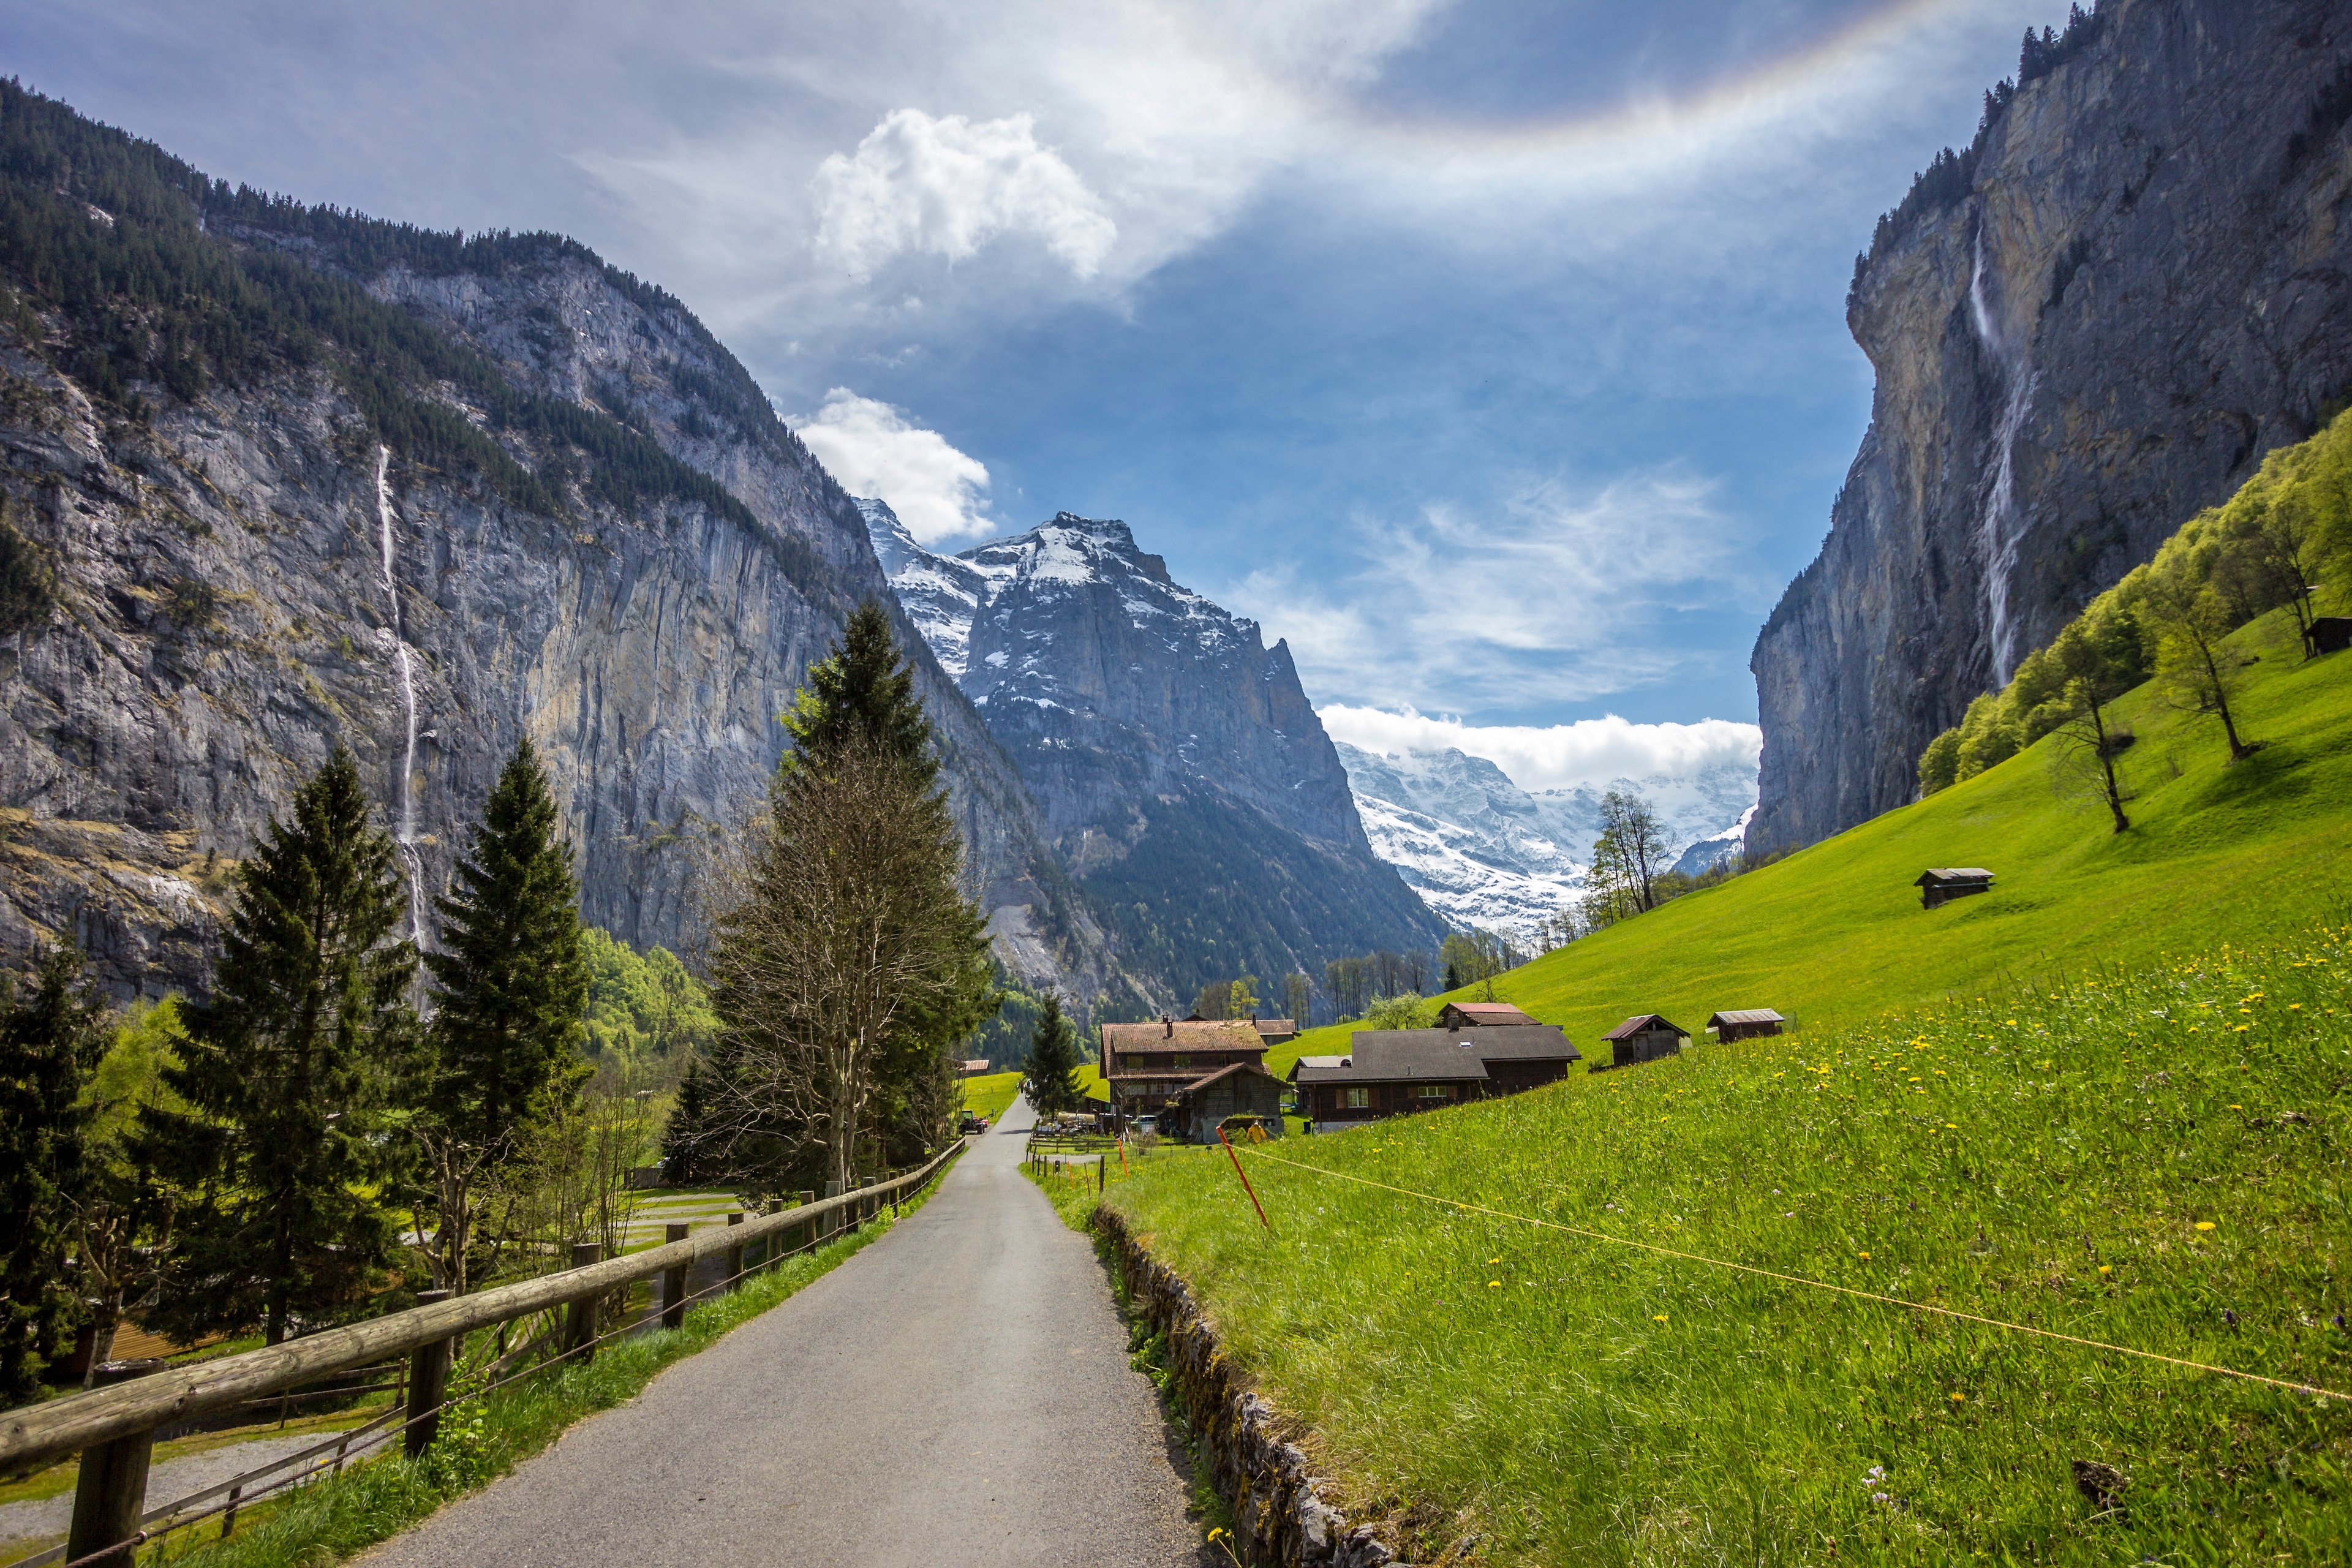 The Ultimate Guide for Planning a Trip to Switzerland